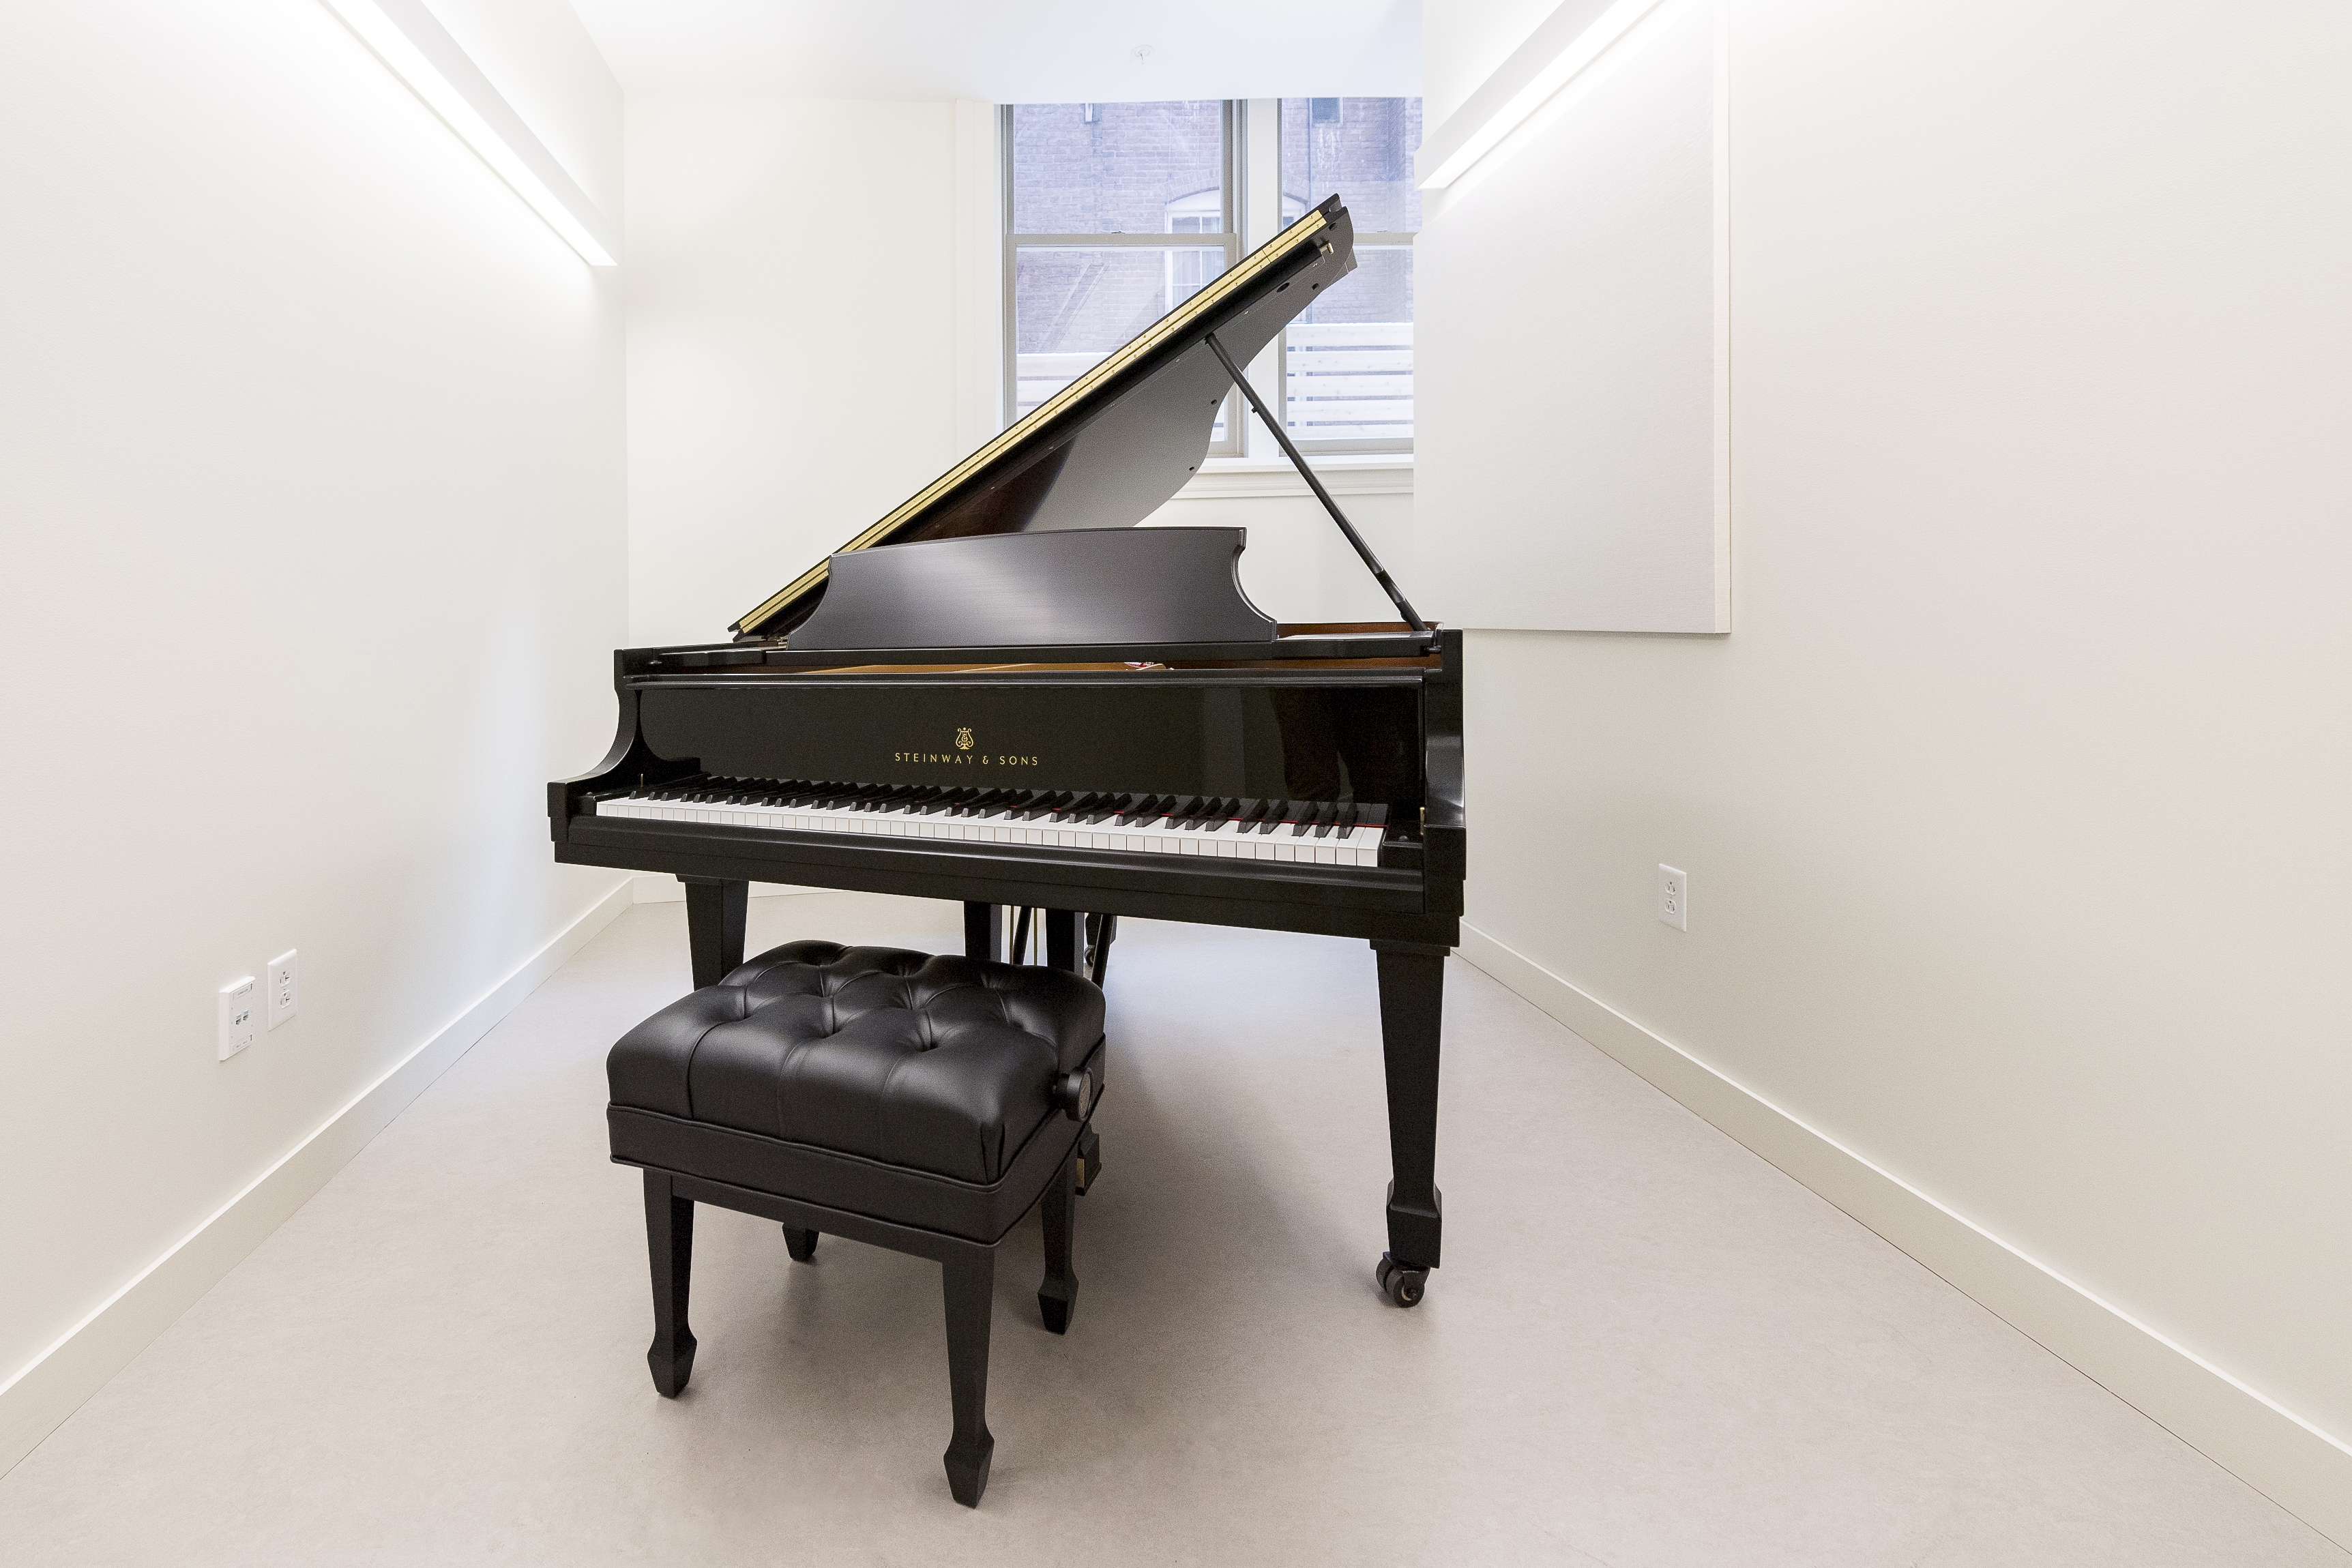 Piano in Hendrie Hall practice room. Photo by Matt Fried 